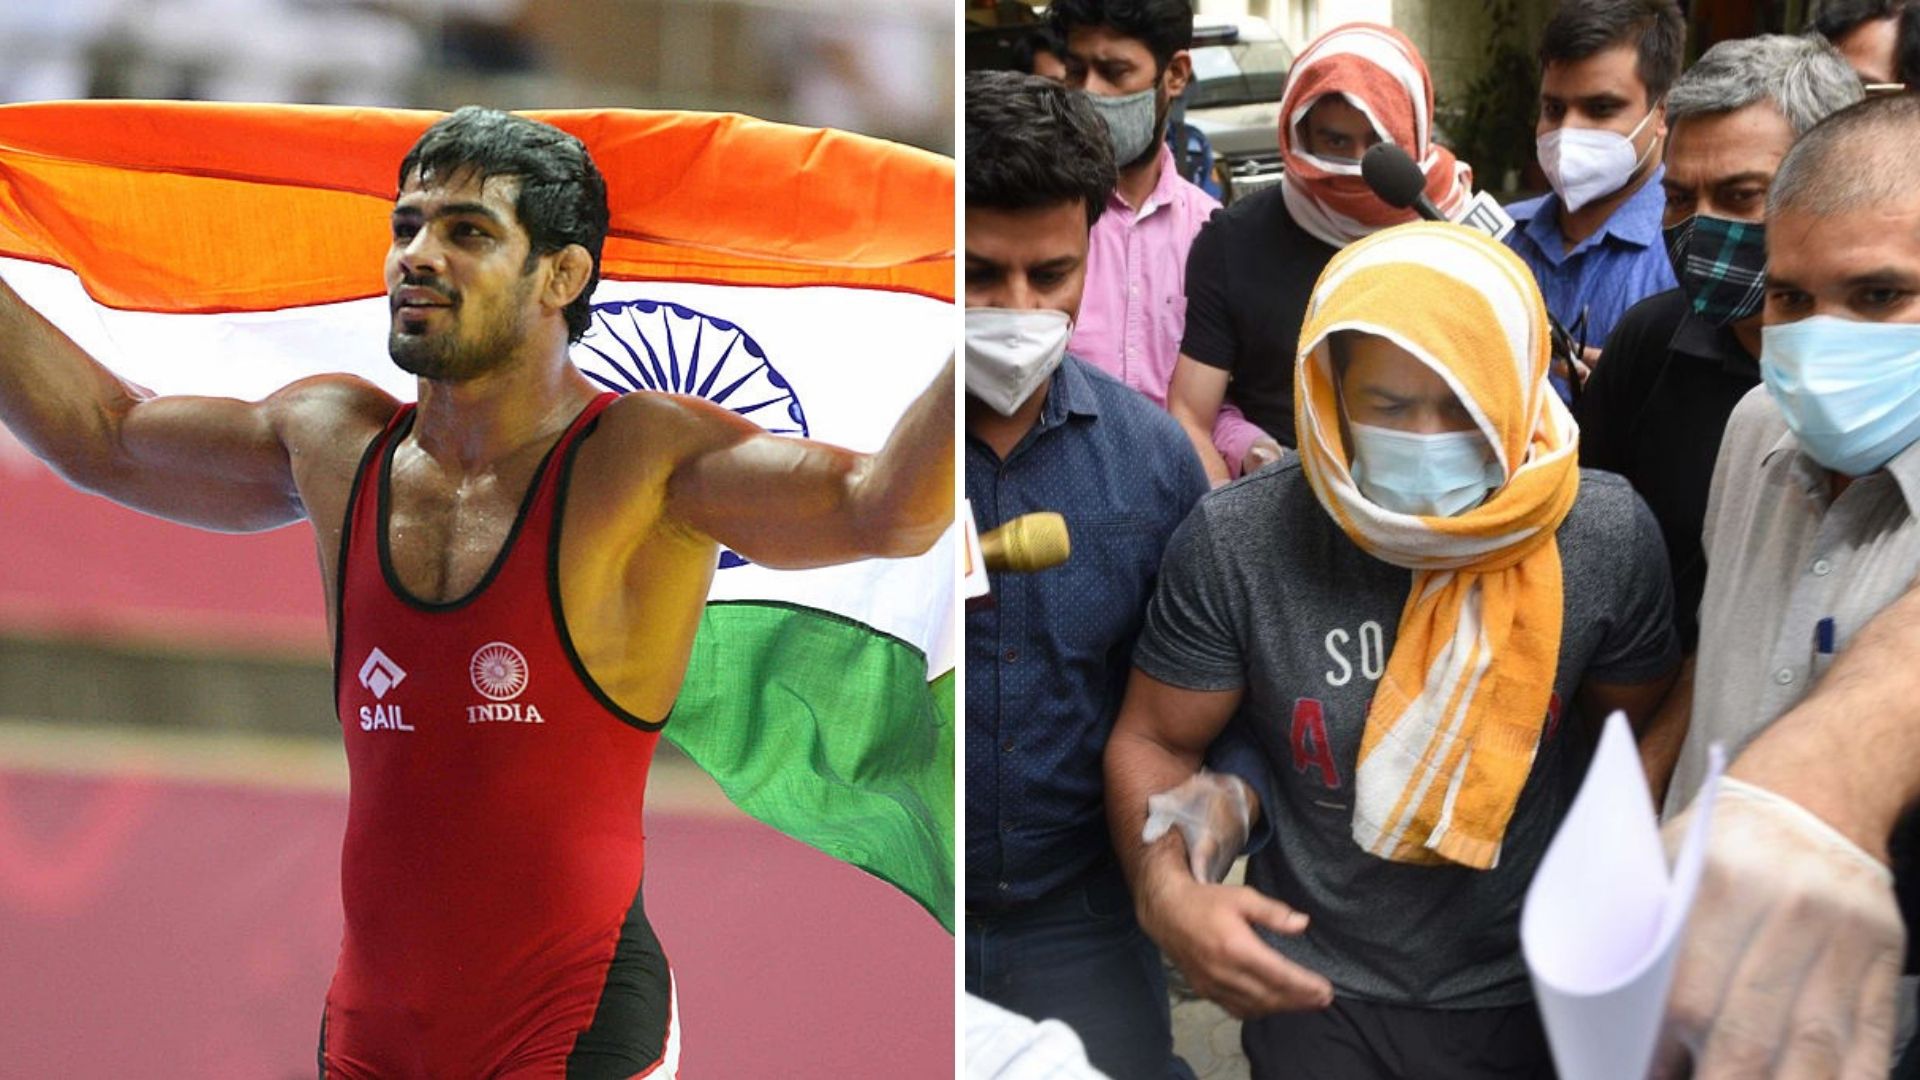 From akhara to extorsion, Sushil’s arrest has shamed the wrestling world